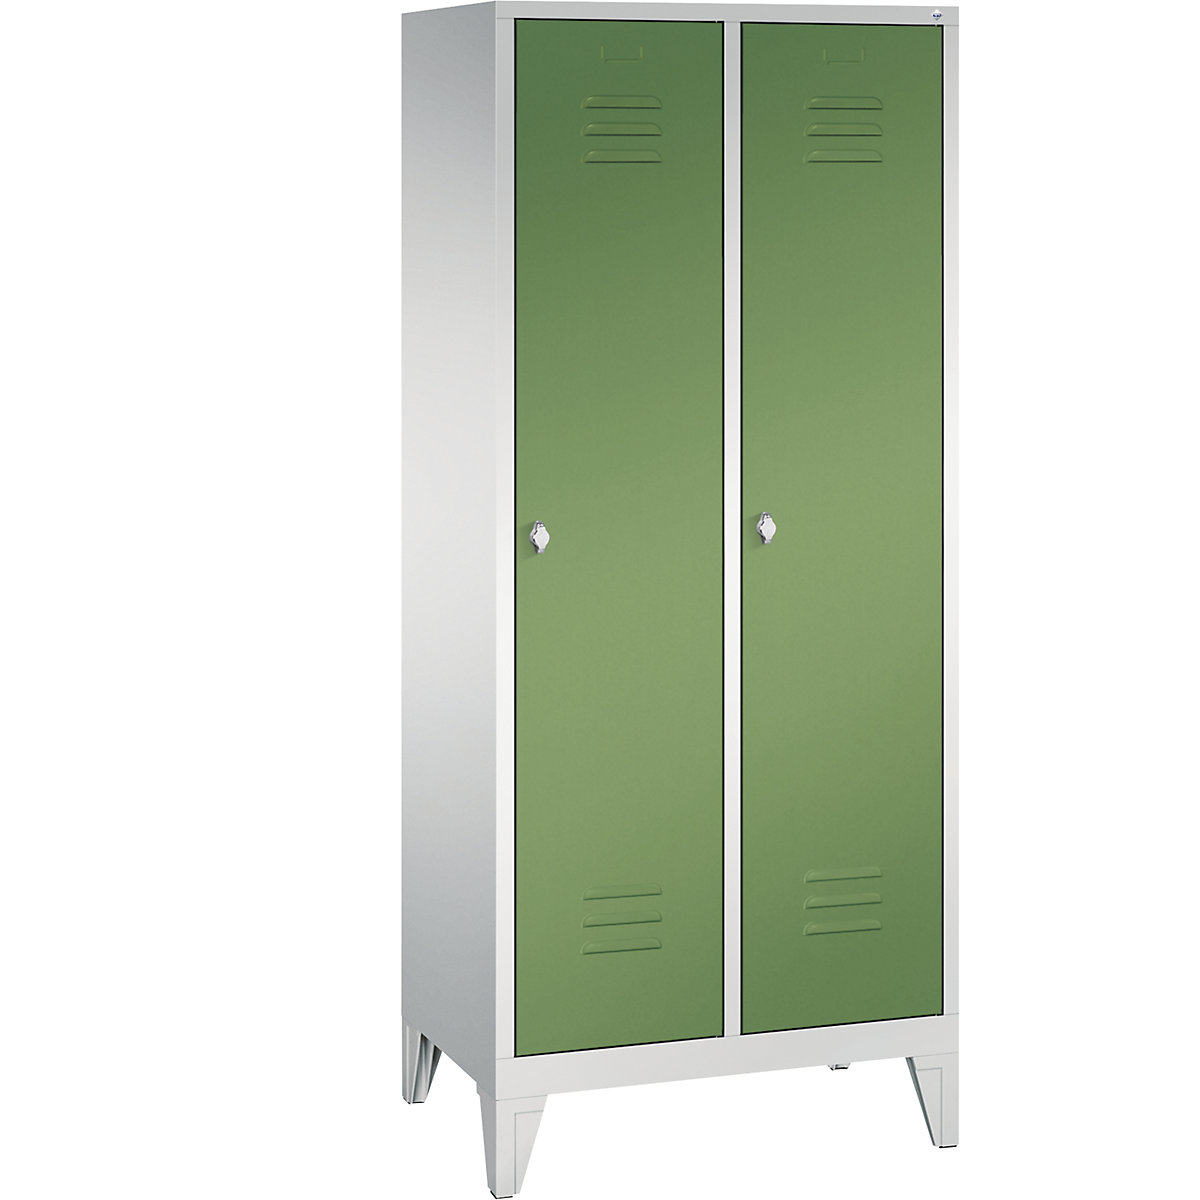 CLASSIC storage cupboard with feet – C+P, 2 compartments, compartment width 400 mm, light grey / reseda green-3